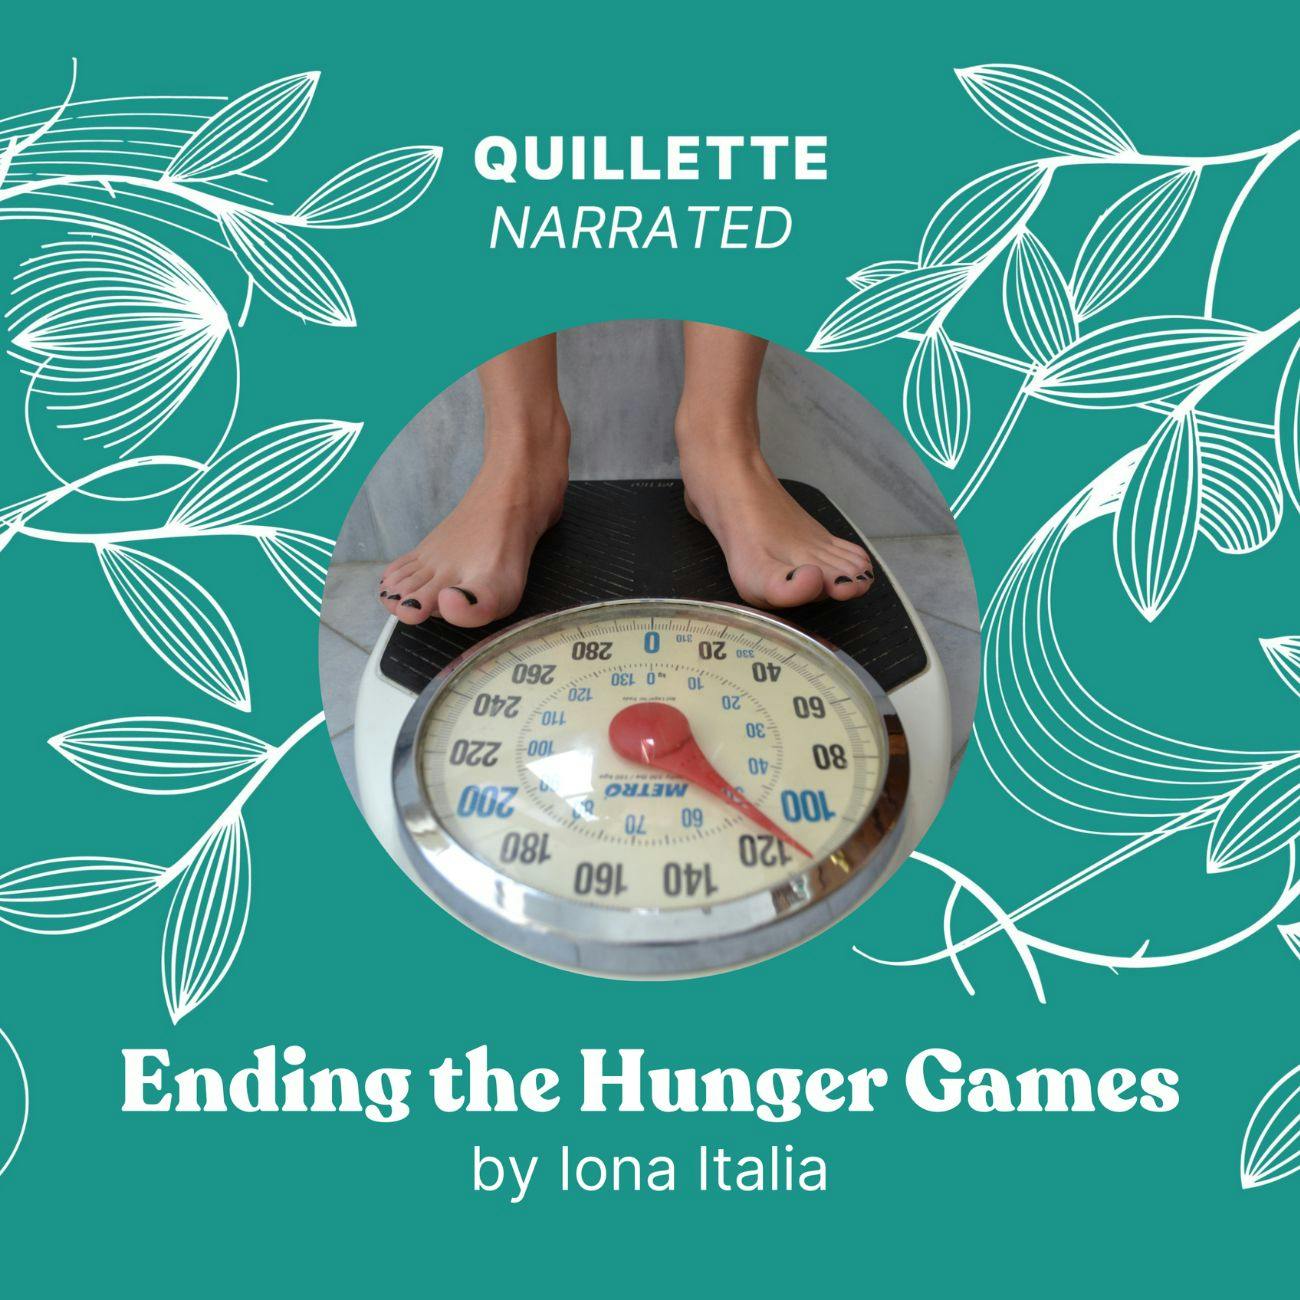 'Ending the Hunger Games' by Iona Italia